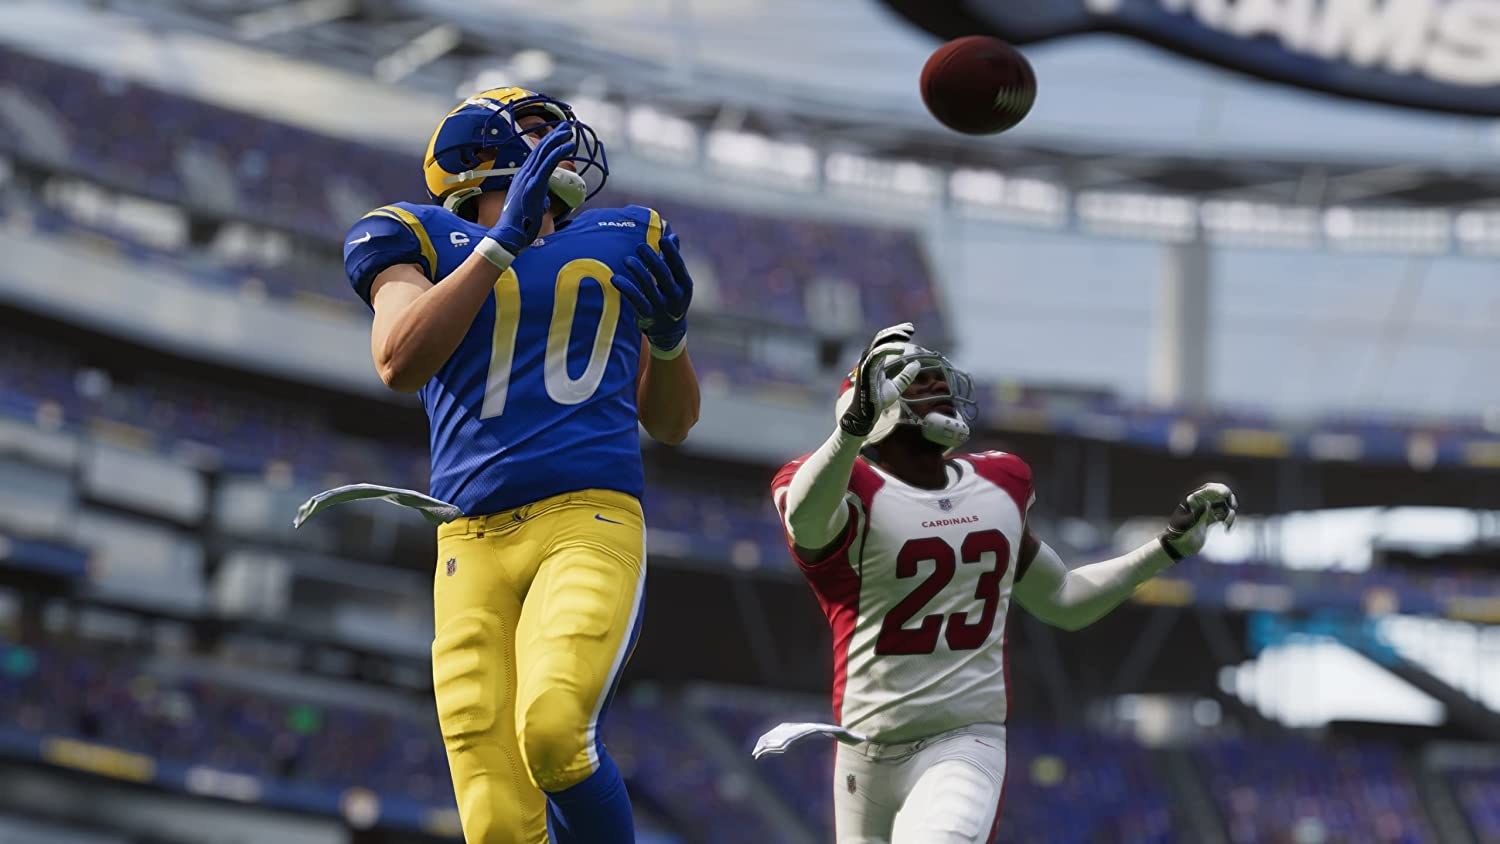 a screenshot of a football game in action